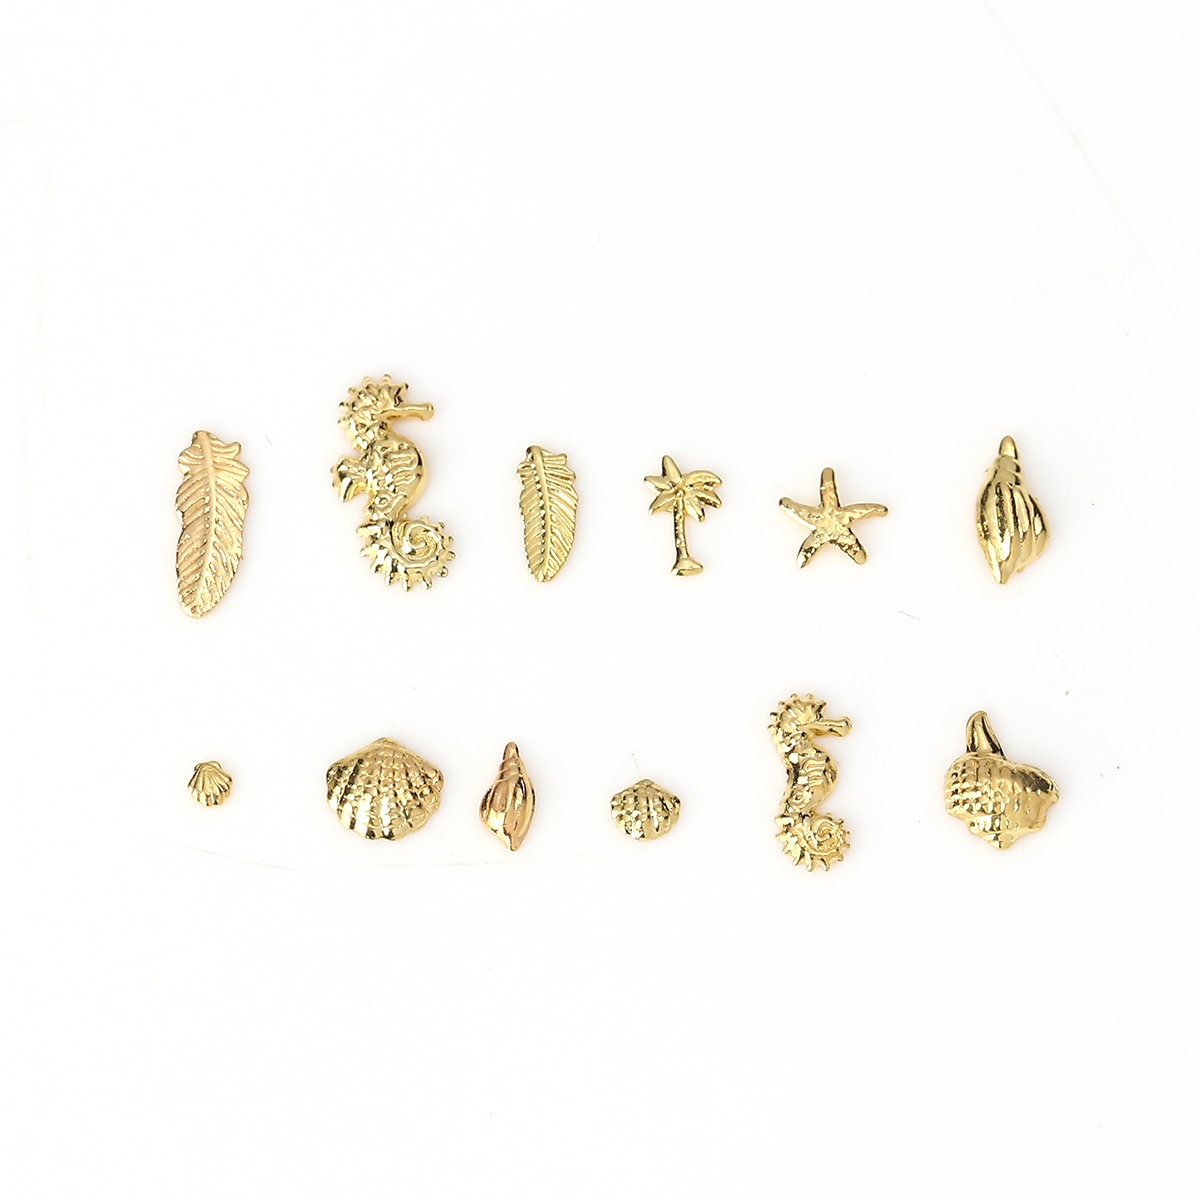 Picture of Zinc Based Alloy Resin Jewelry Tools DIY Making Craft Ocean Animal Gold Plated 5.9cm(2 3/8") Dia., 1 Box